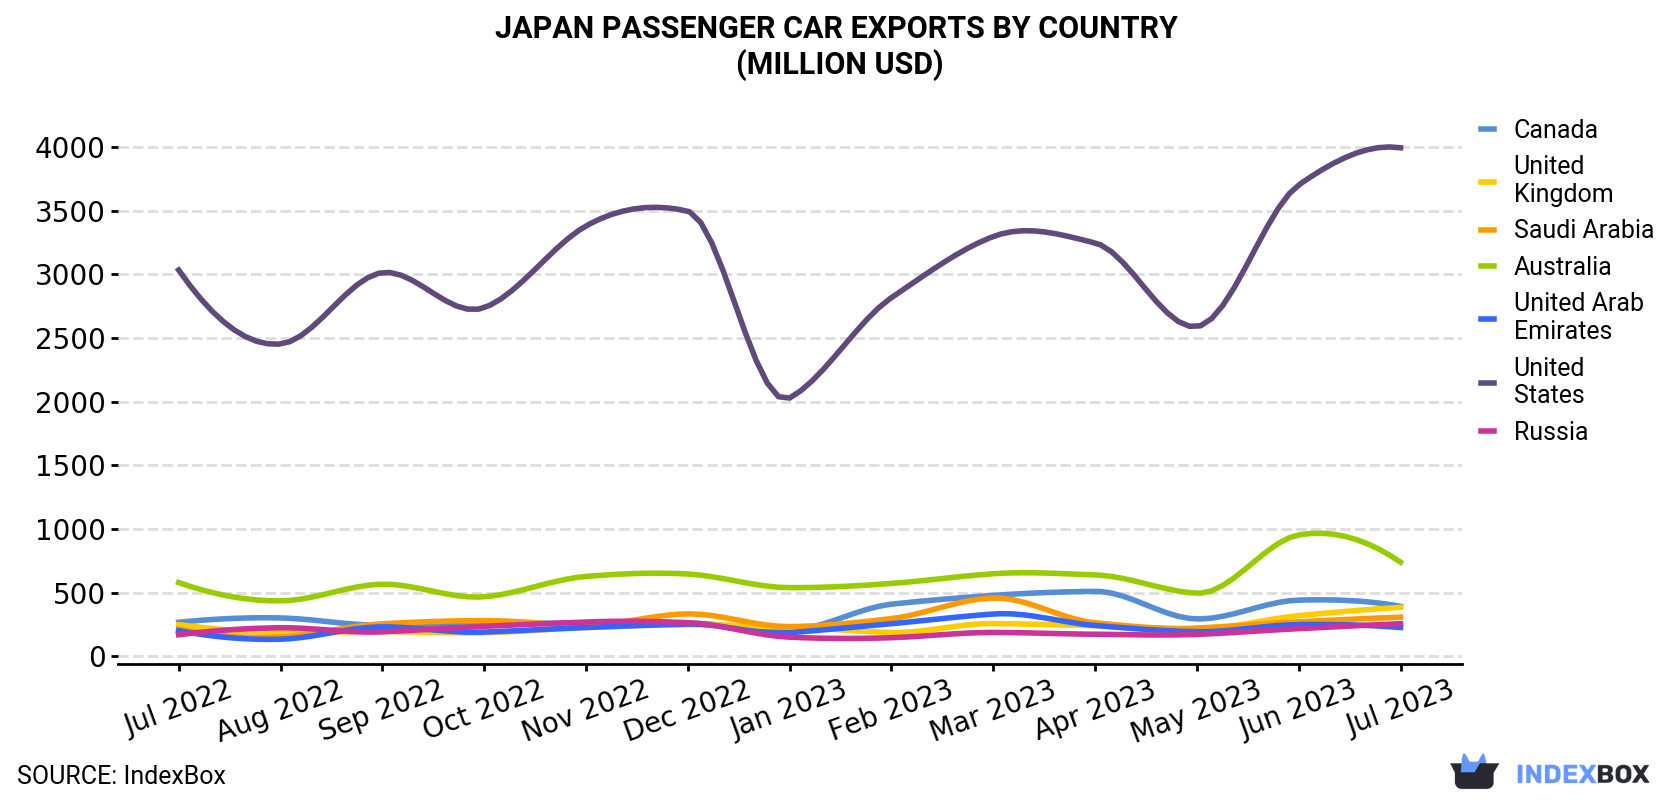 Japan Passenger Car Exports By Country (Million USD)